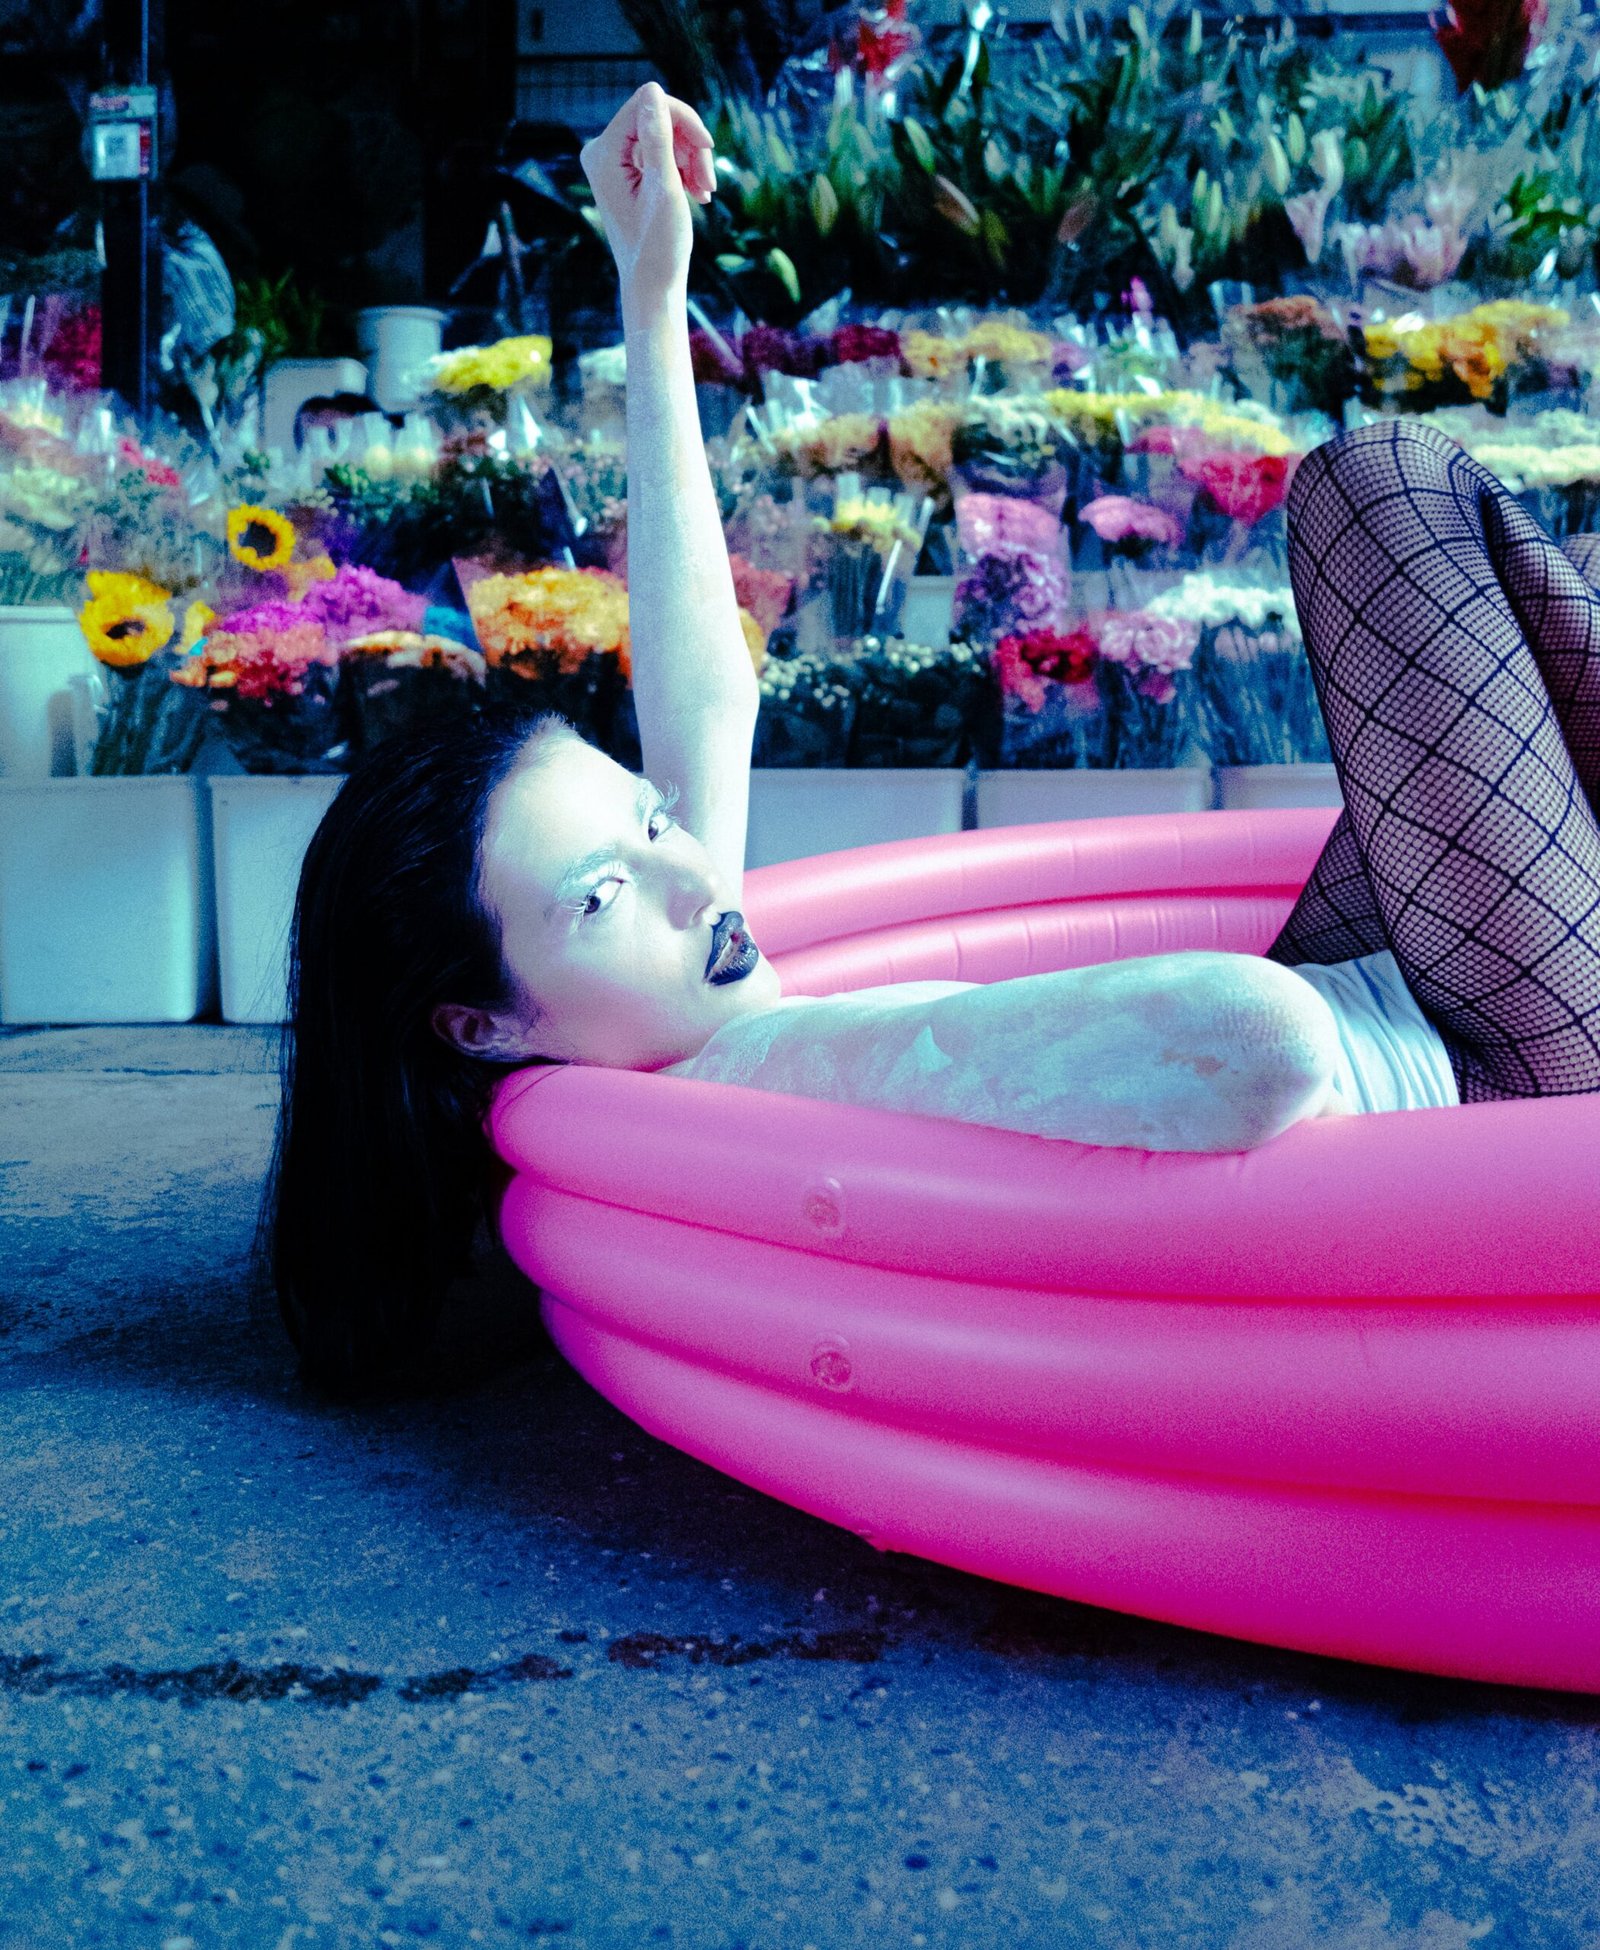 Portrait of a Female Model Lying in an Inflatable Swimming Pool